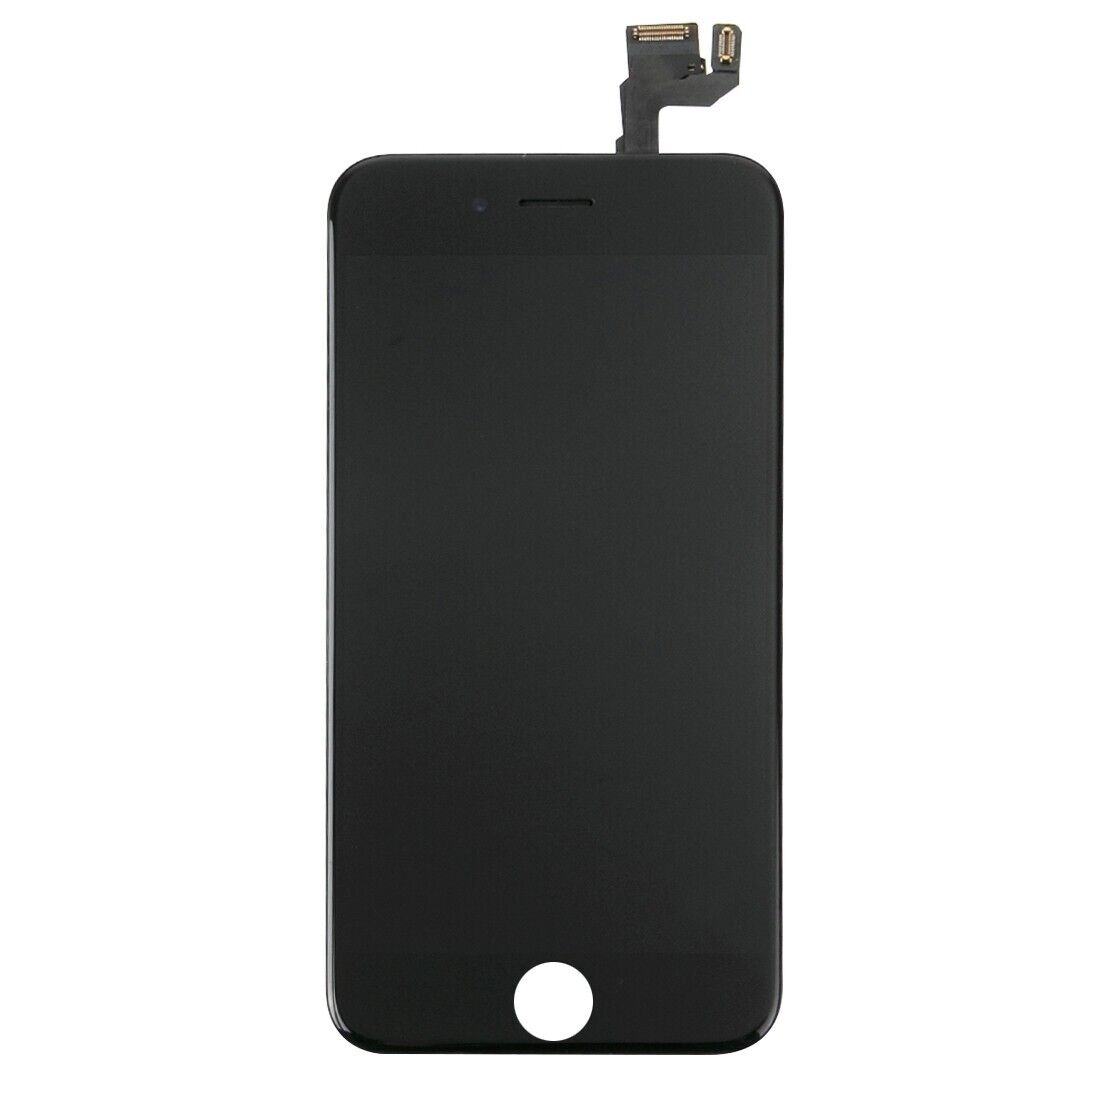 Digitizer Assembly (Front Camera + Original LCD + Frame + Touch Panel) for iPhone 6s(Black)